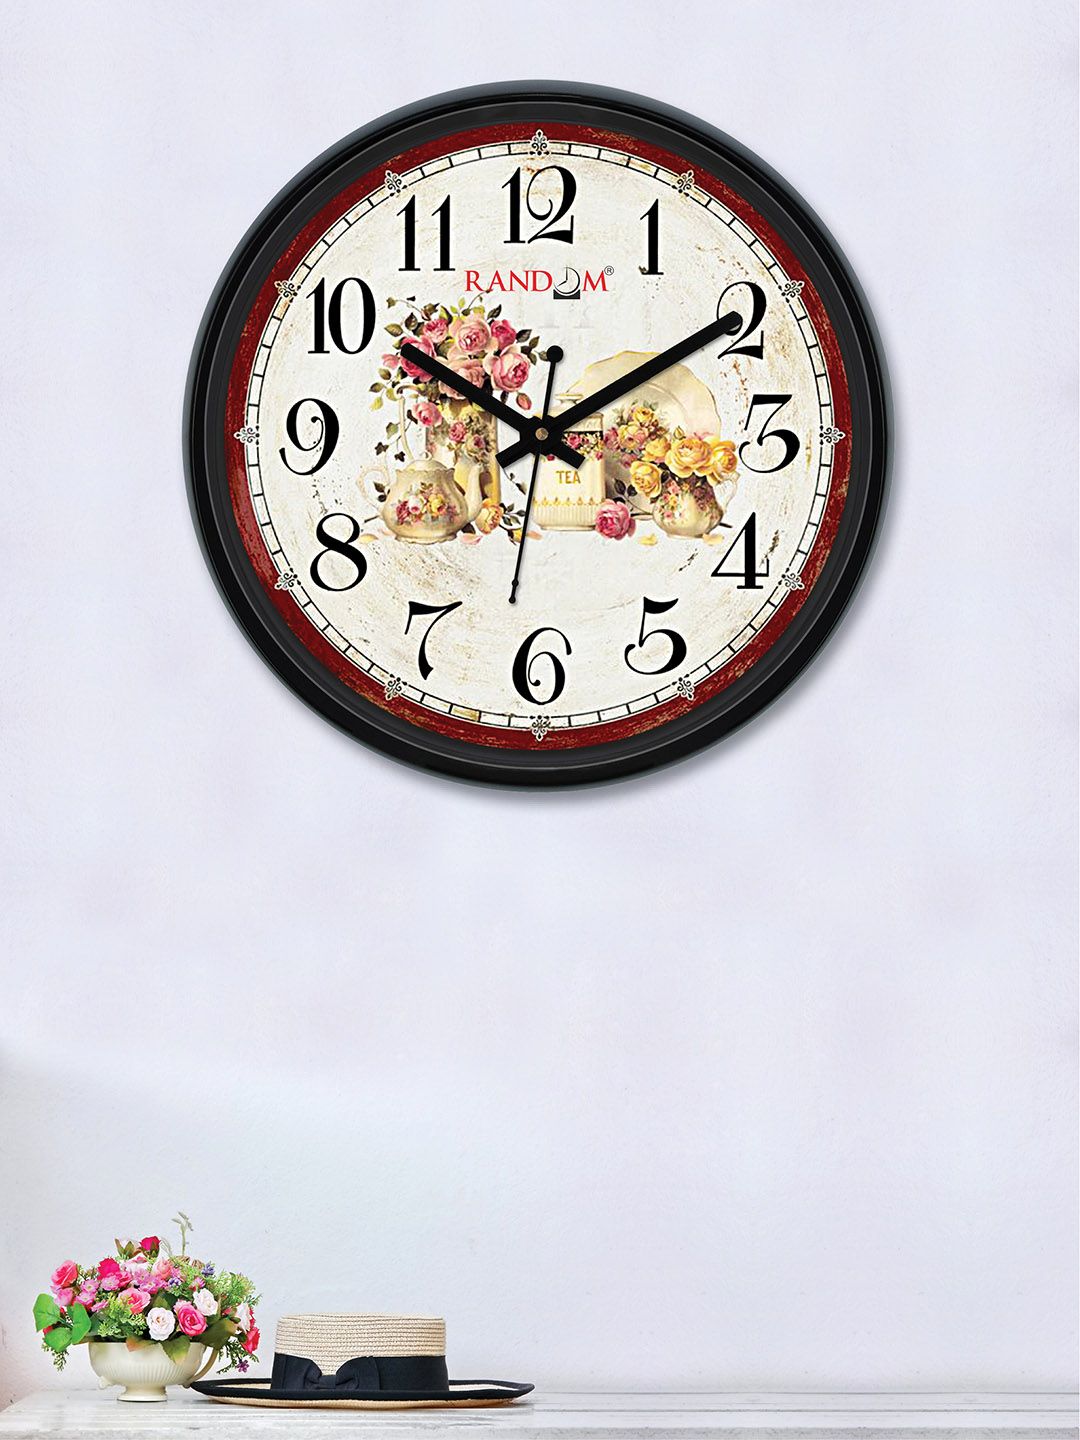 RANDOM Off-White & Pink Round Printed 30 cm Wall Clock Price in India